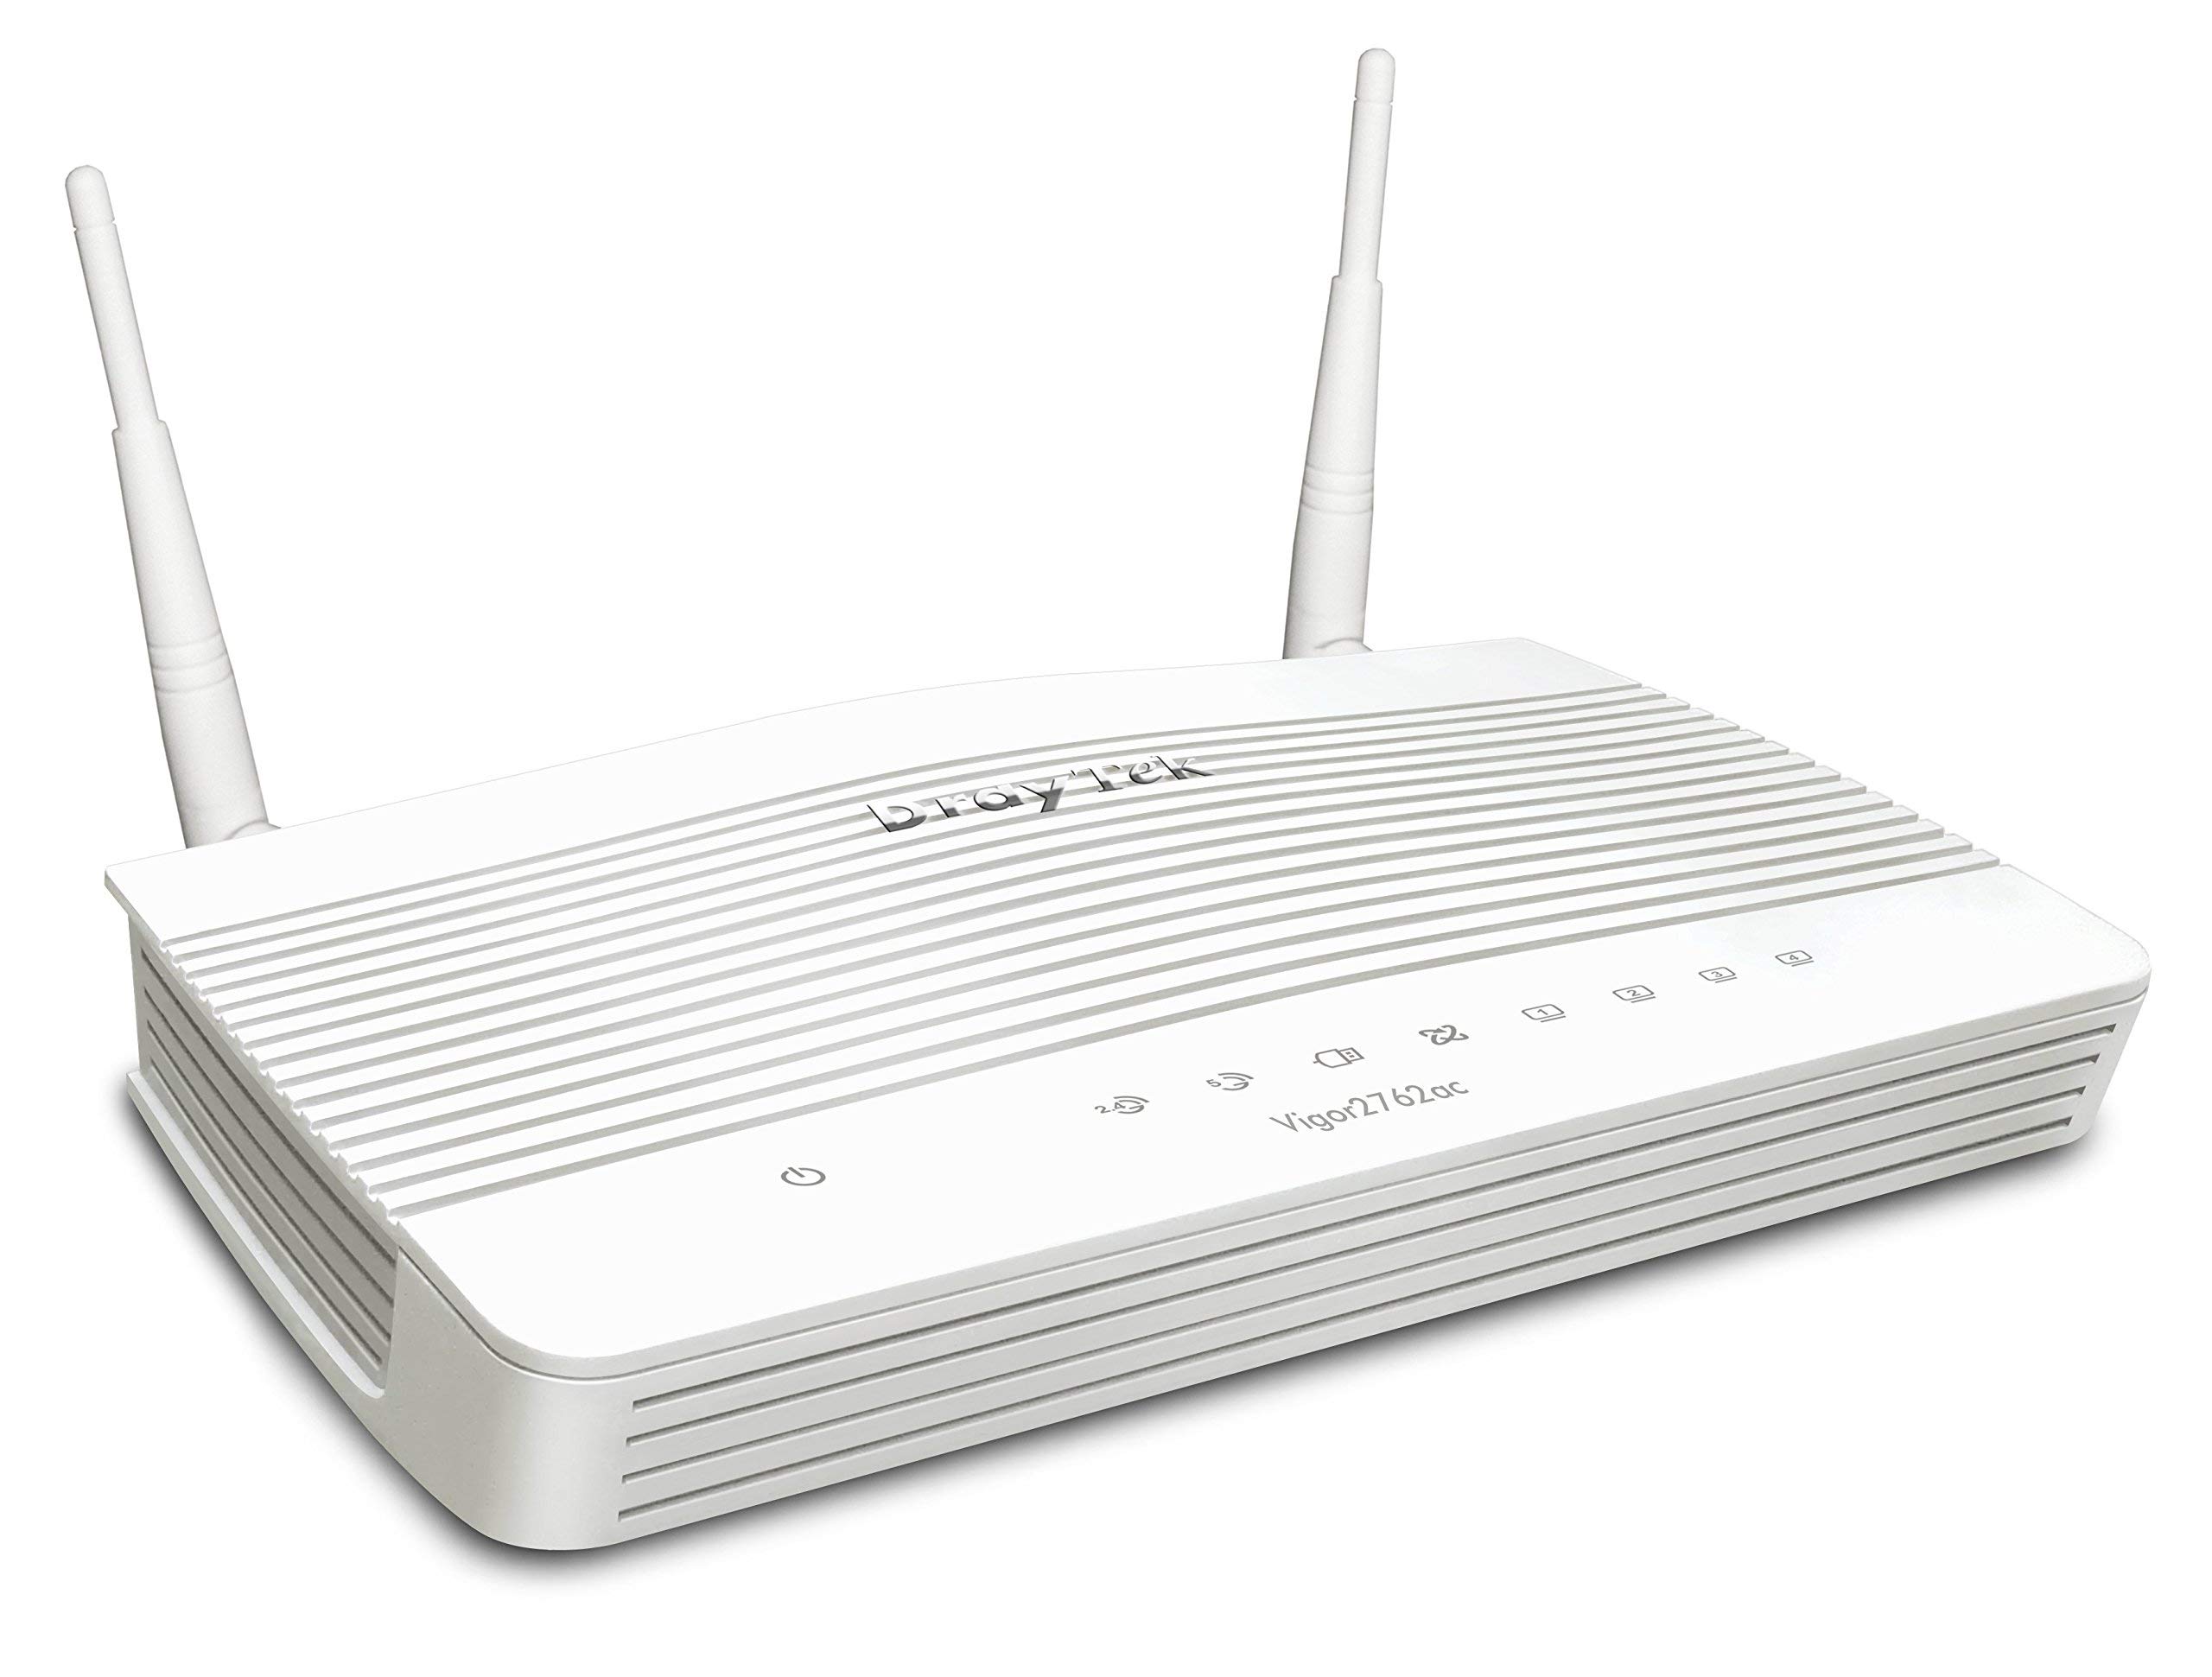 Disable any firewall or security software on your router that might be blocking the Xbox Live service.
Connect your Xbox One directly to the modem using an Ethernet cable to bypass any potential router issues.